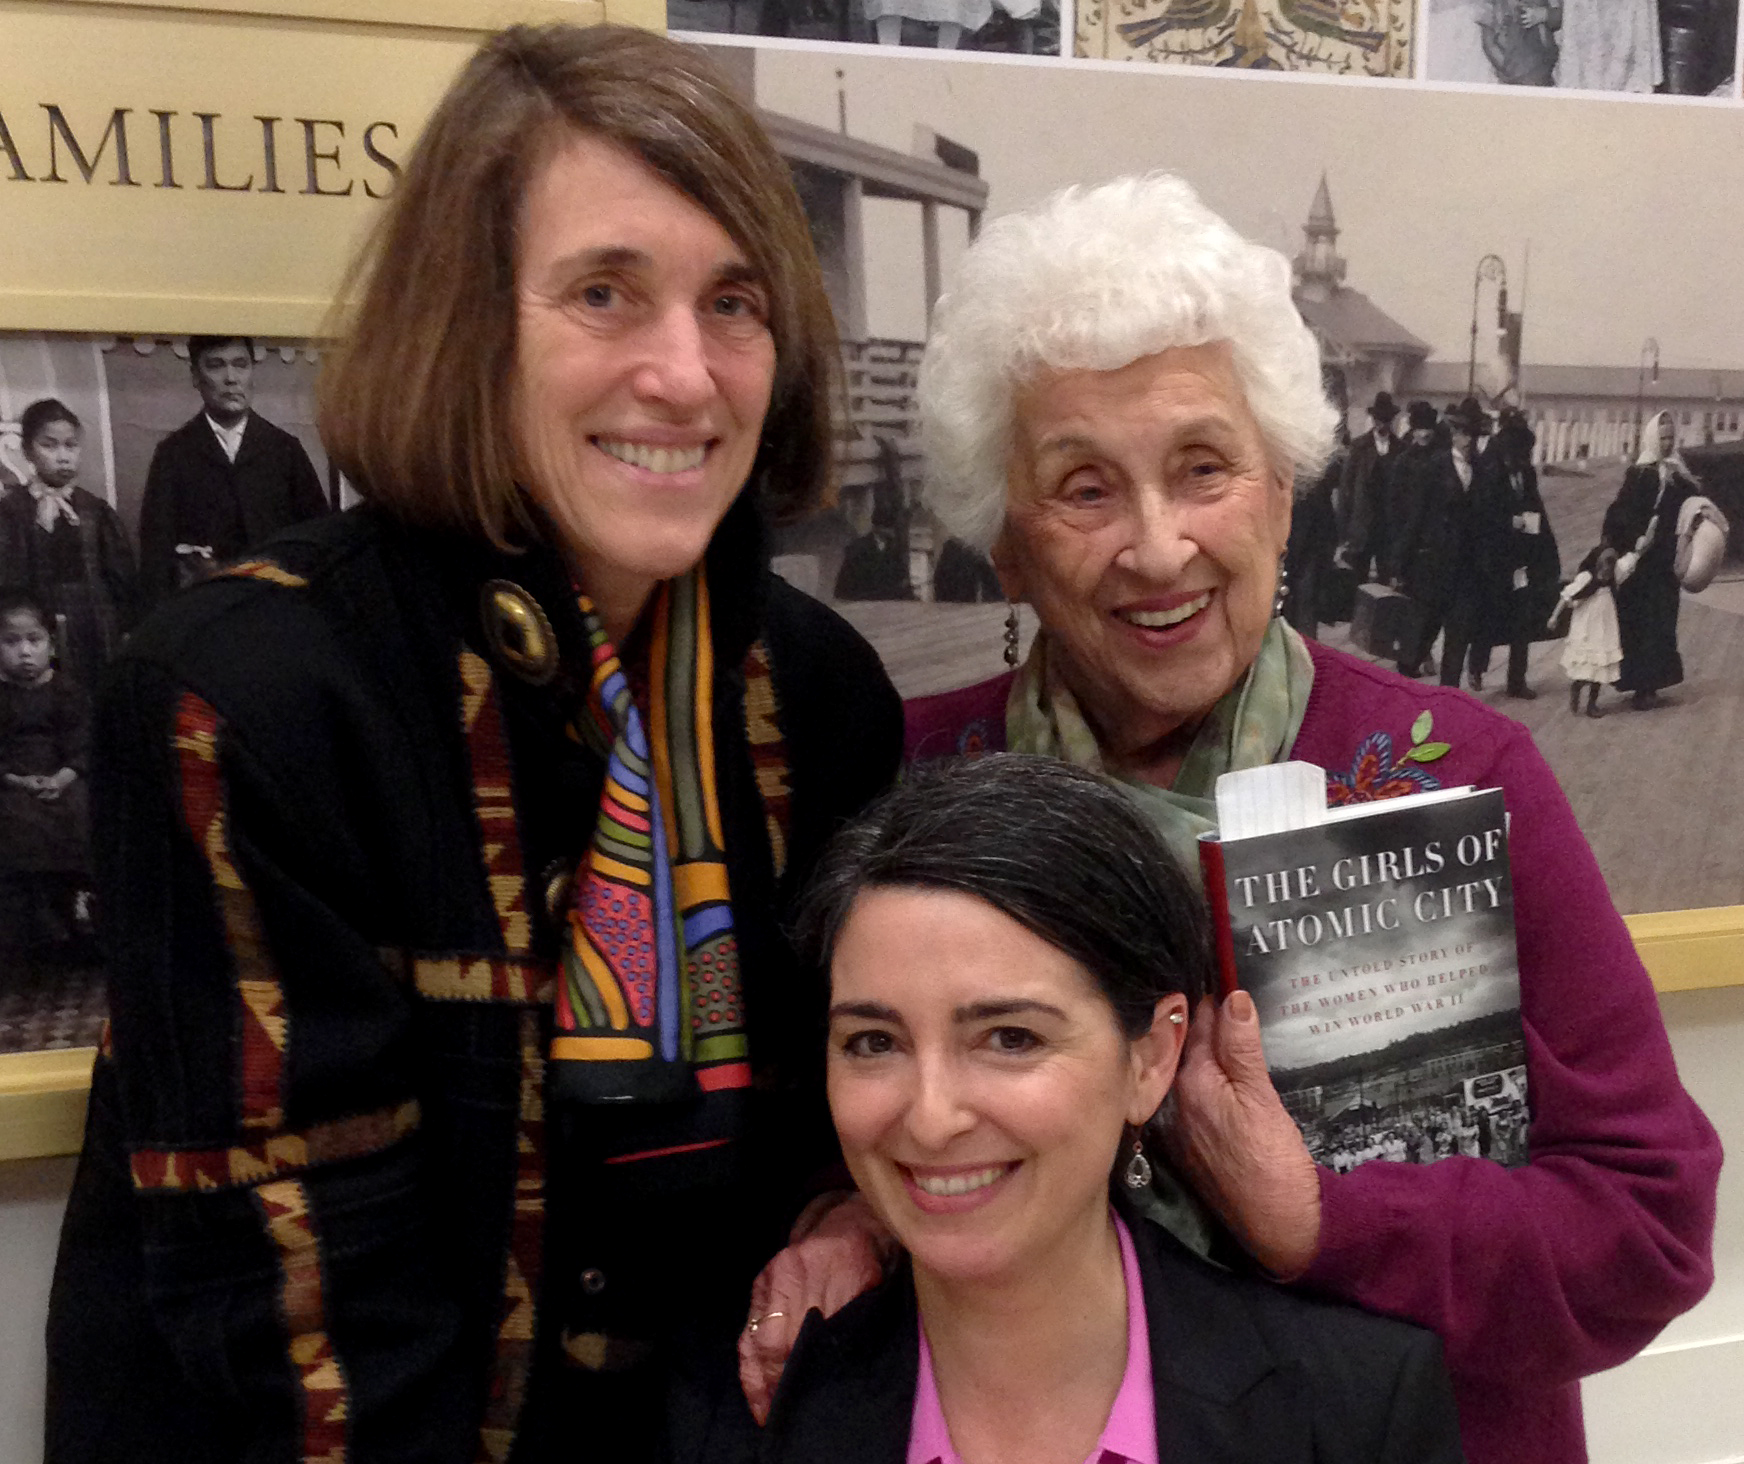 Cindy Kelly with Denise Kiernan and Rosemary Lane, one of the women featured in Kiernan's book.